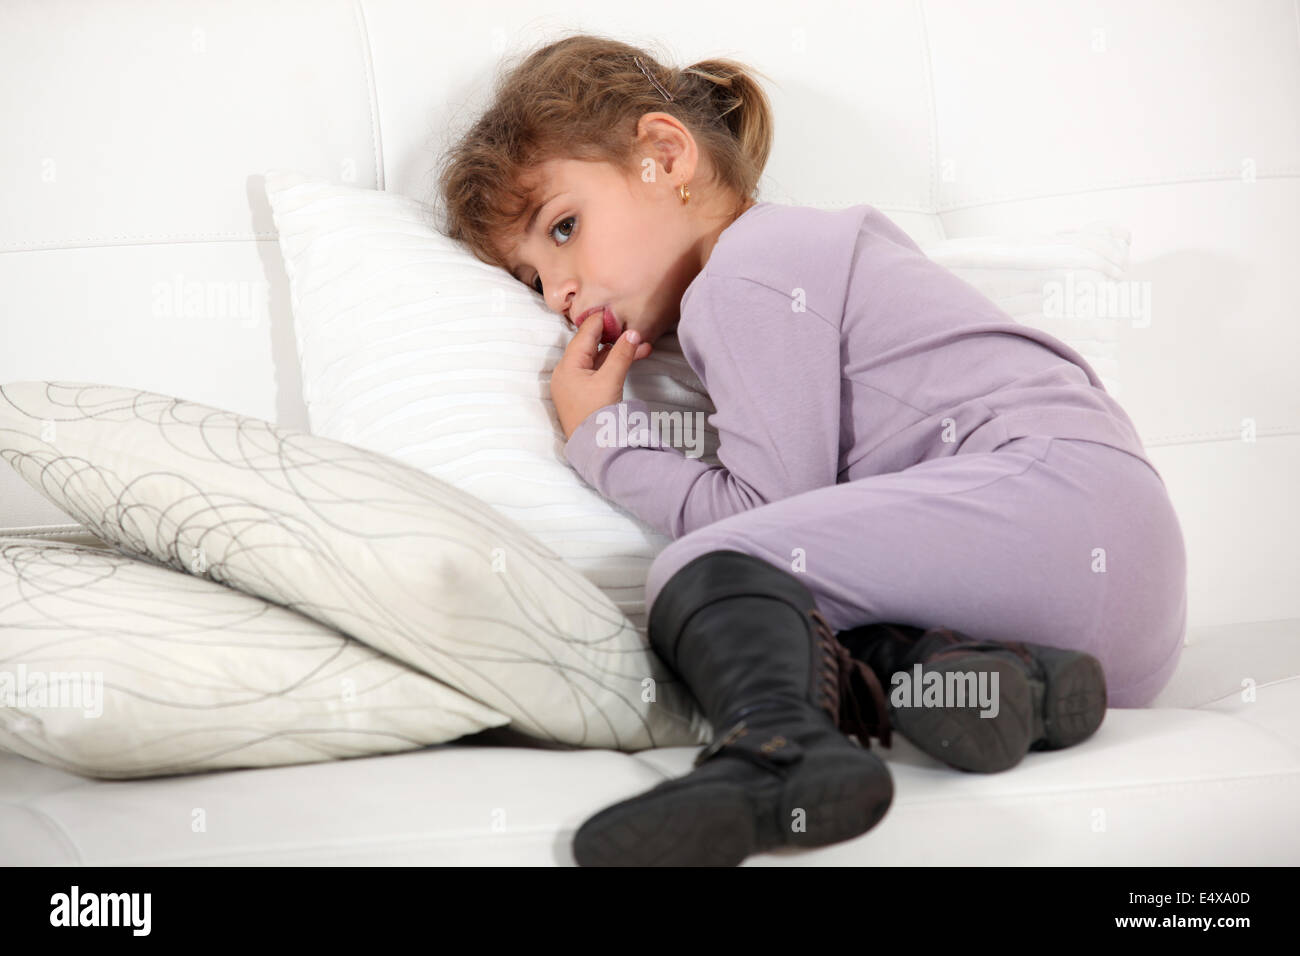 Boots Sleepy Young High Resolution Stock Photography and Images - Alamy